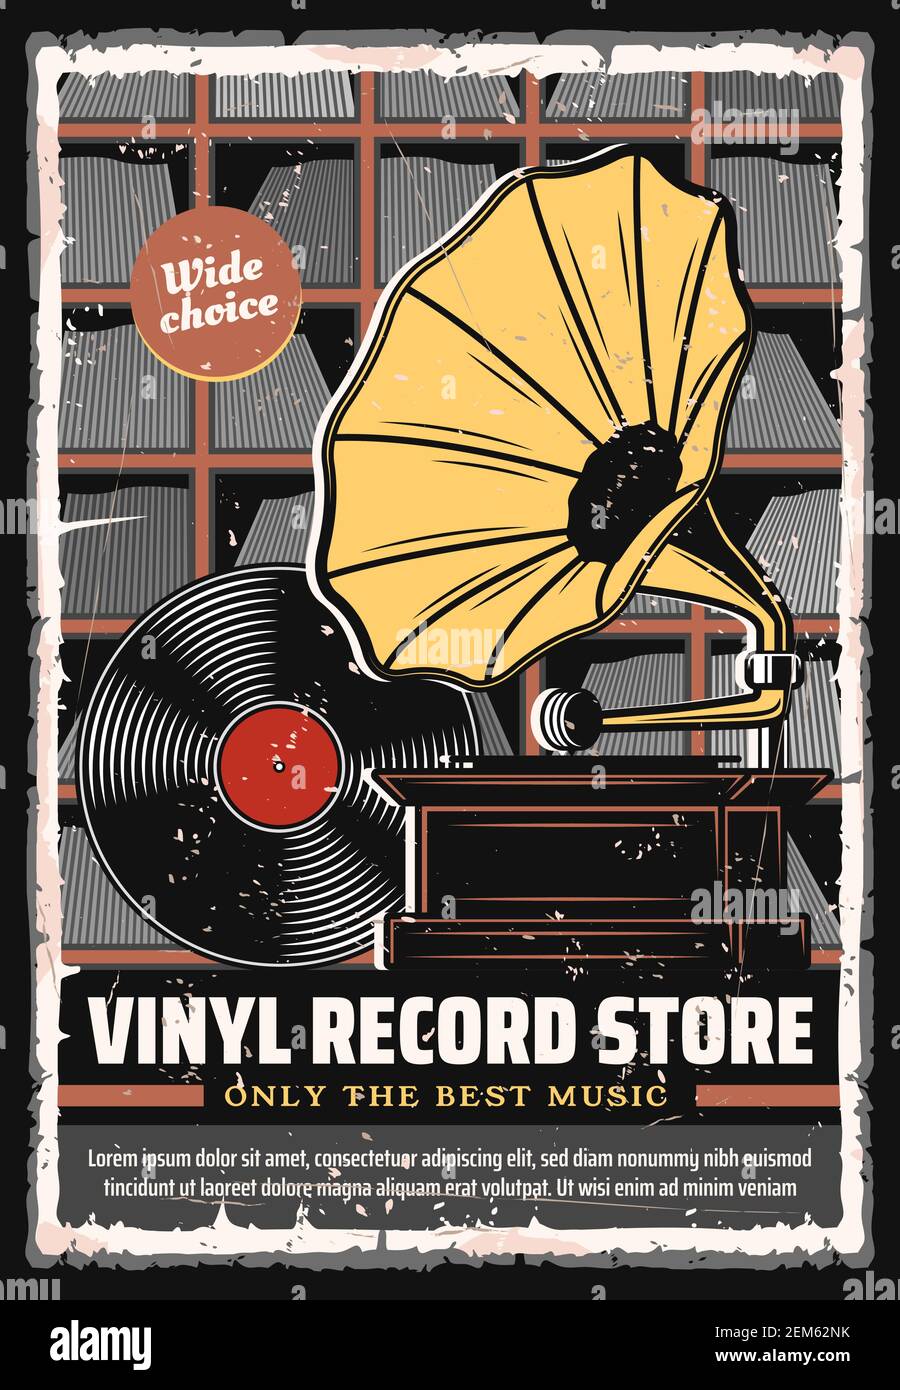 Vinyl records shop vector retro poster. Wide choice of vintage vinyl records and players music store, gramophone phonograph and musical disks on shelv Stock Vector